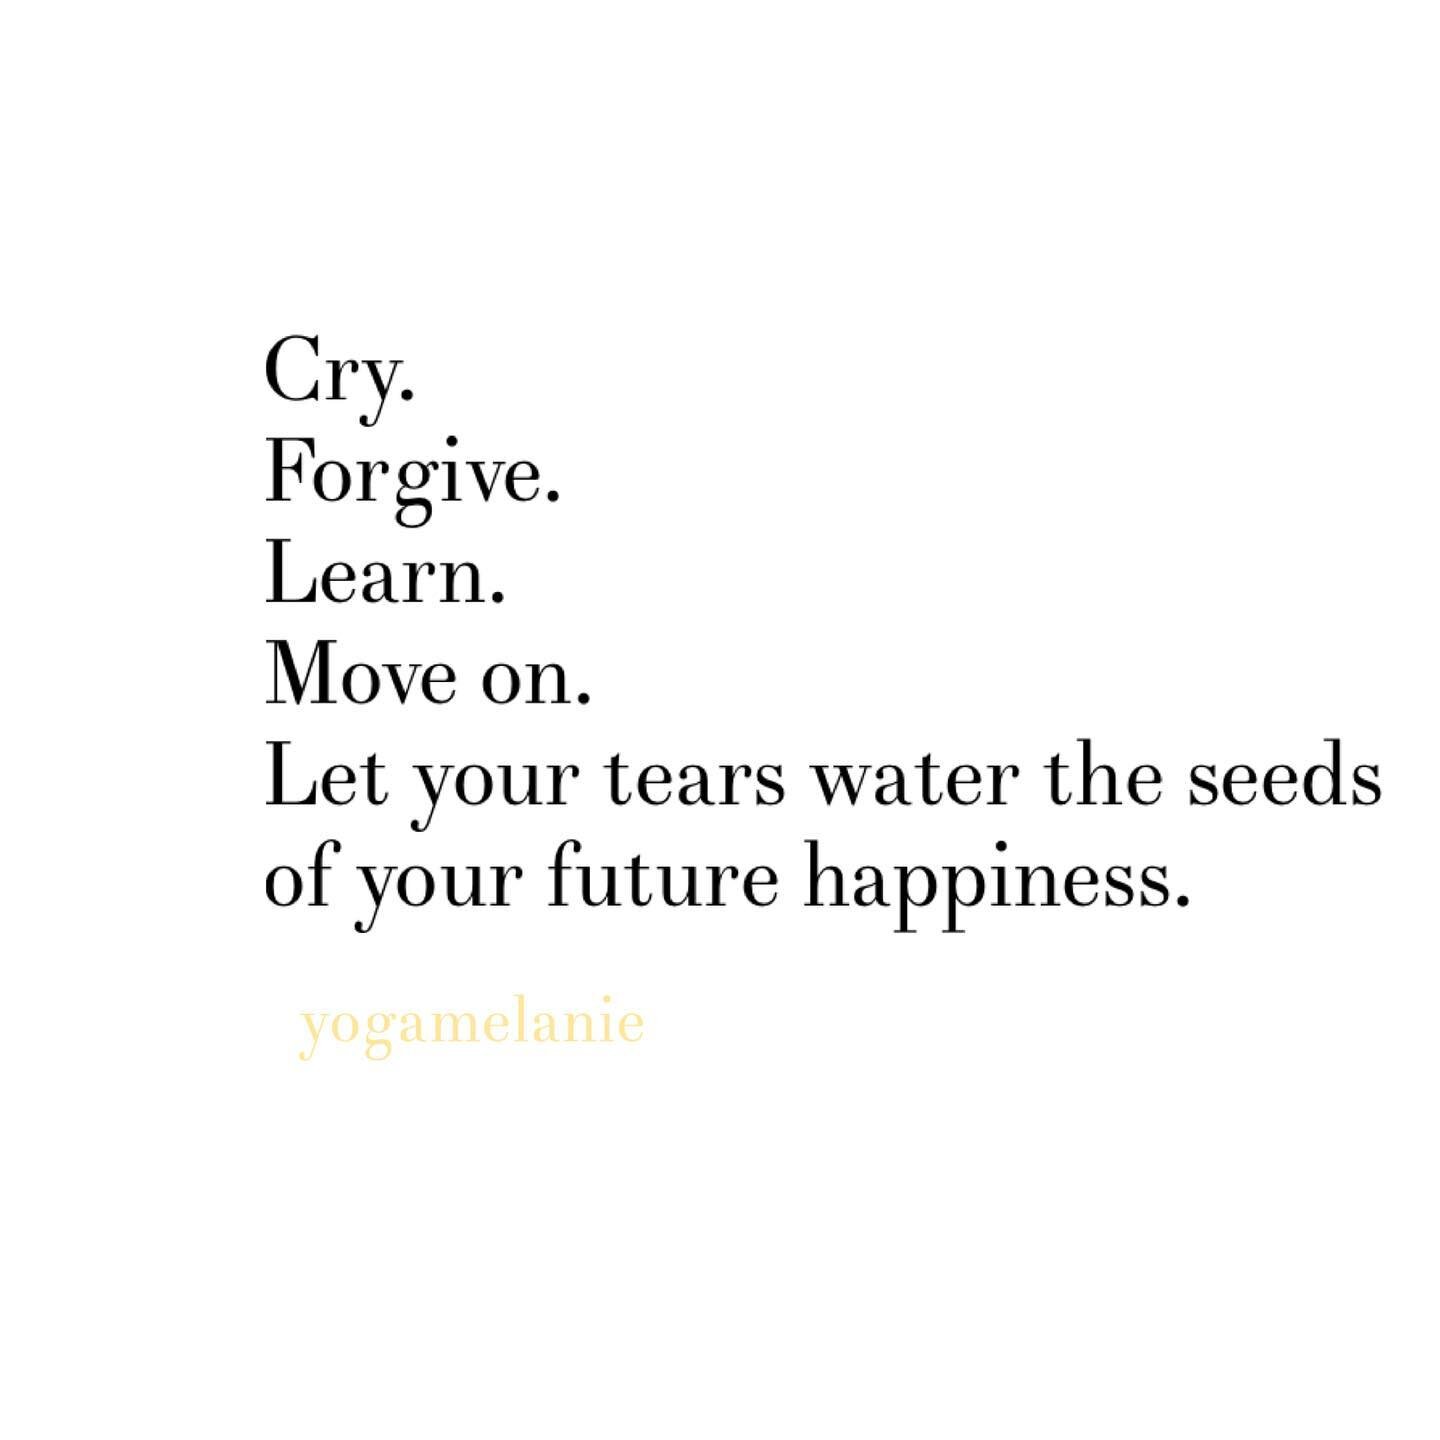 #future #happiness #happy #behappy #cry #forgive #learn #moveon #process #lifelong #lifelonglearning #circle #life #lovelife #openheart #openmind #mindset #mind #uptoyou